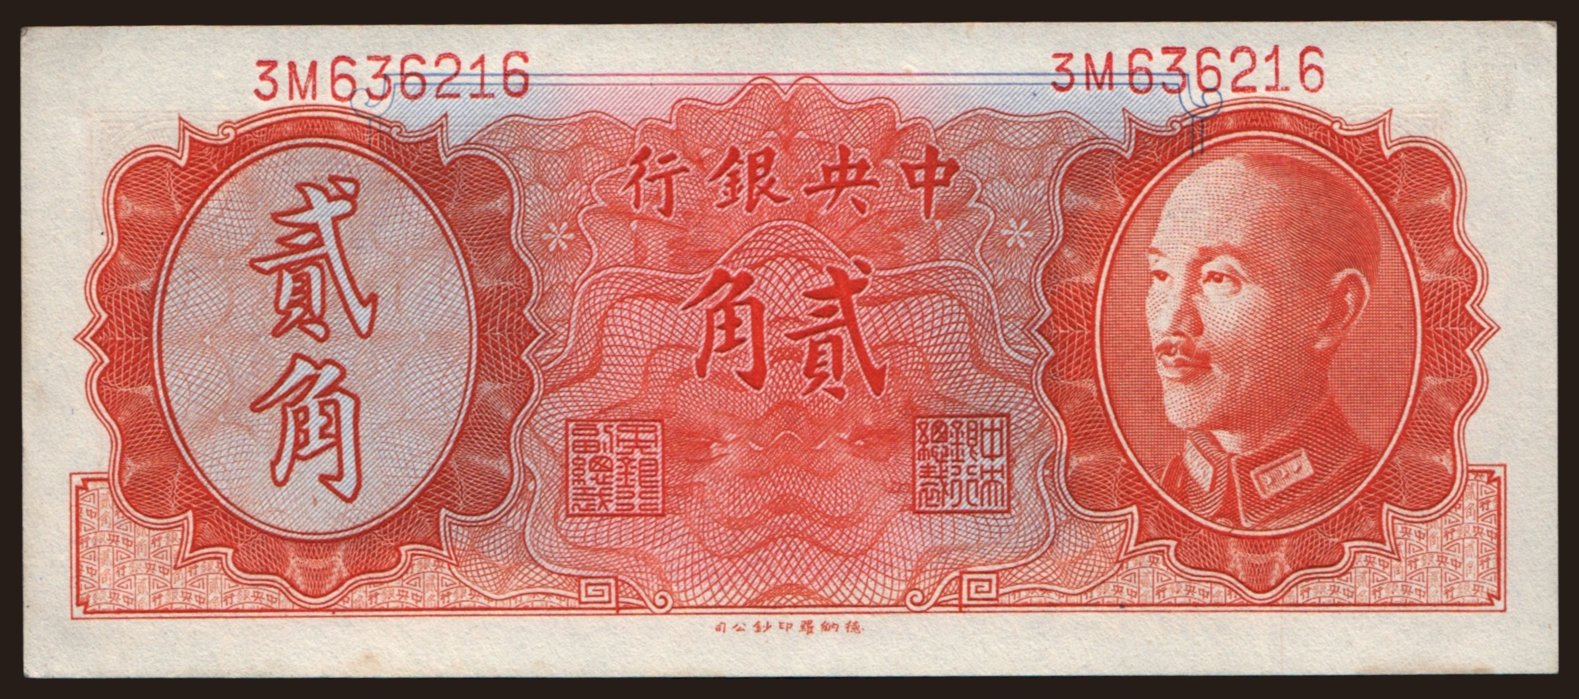 Central Bank of China, 20 cents, 1946